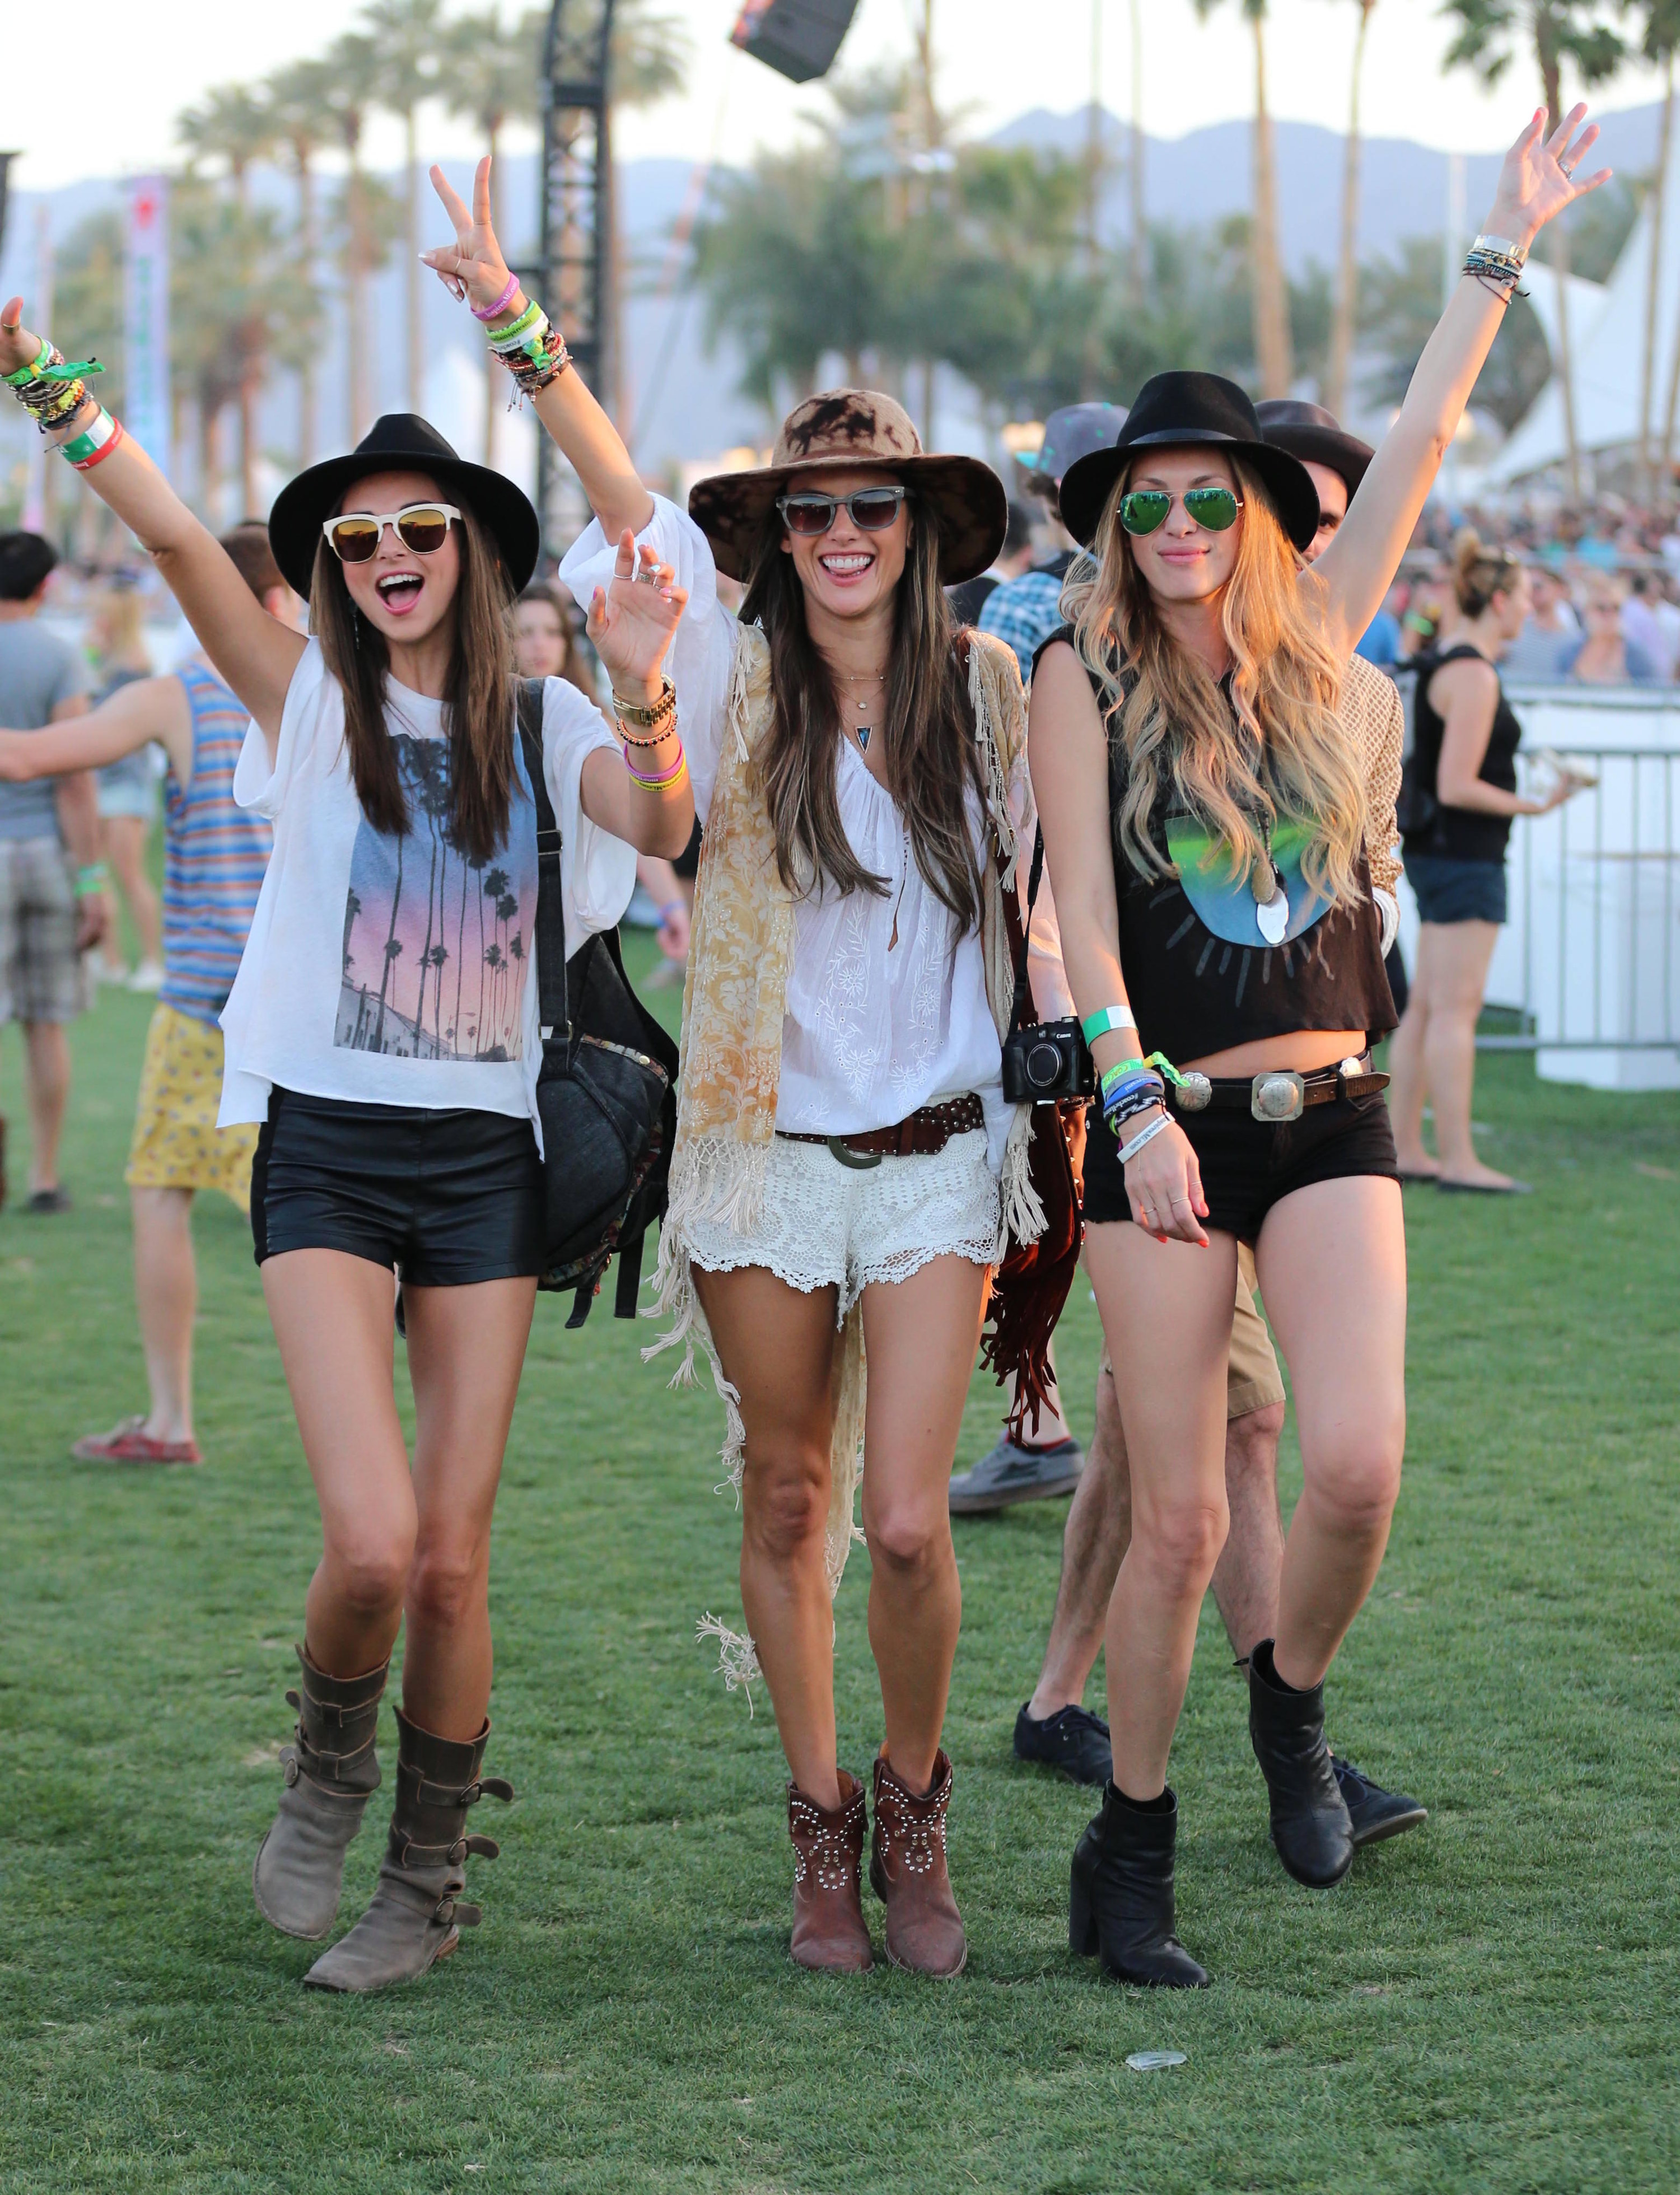 A group of women at an outdoor music festival